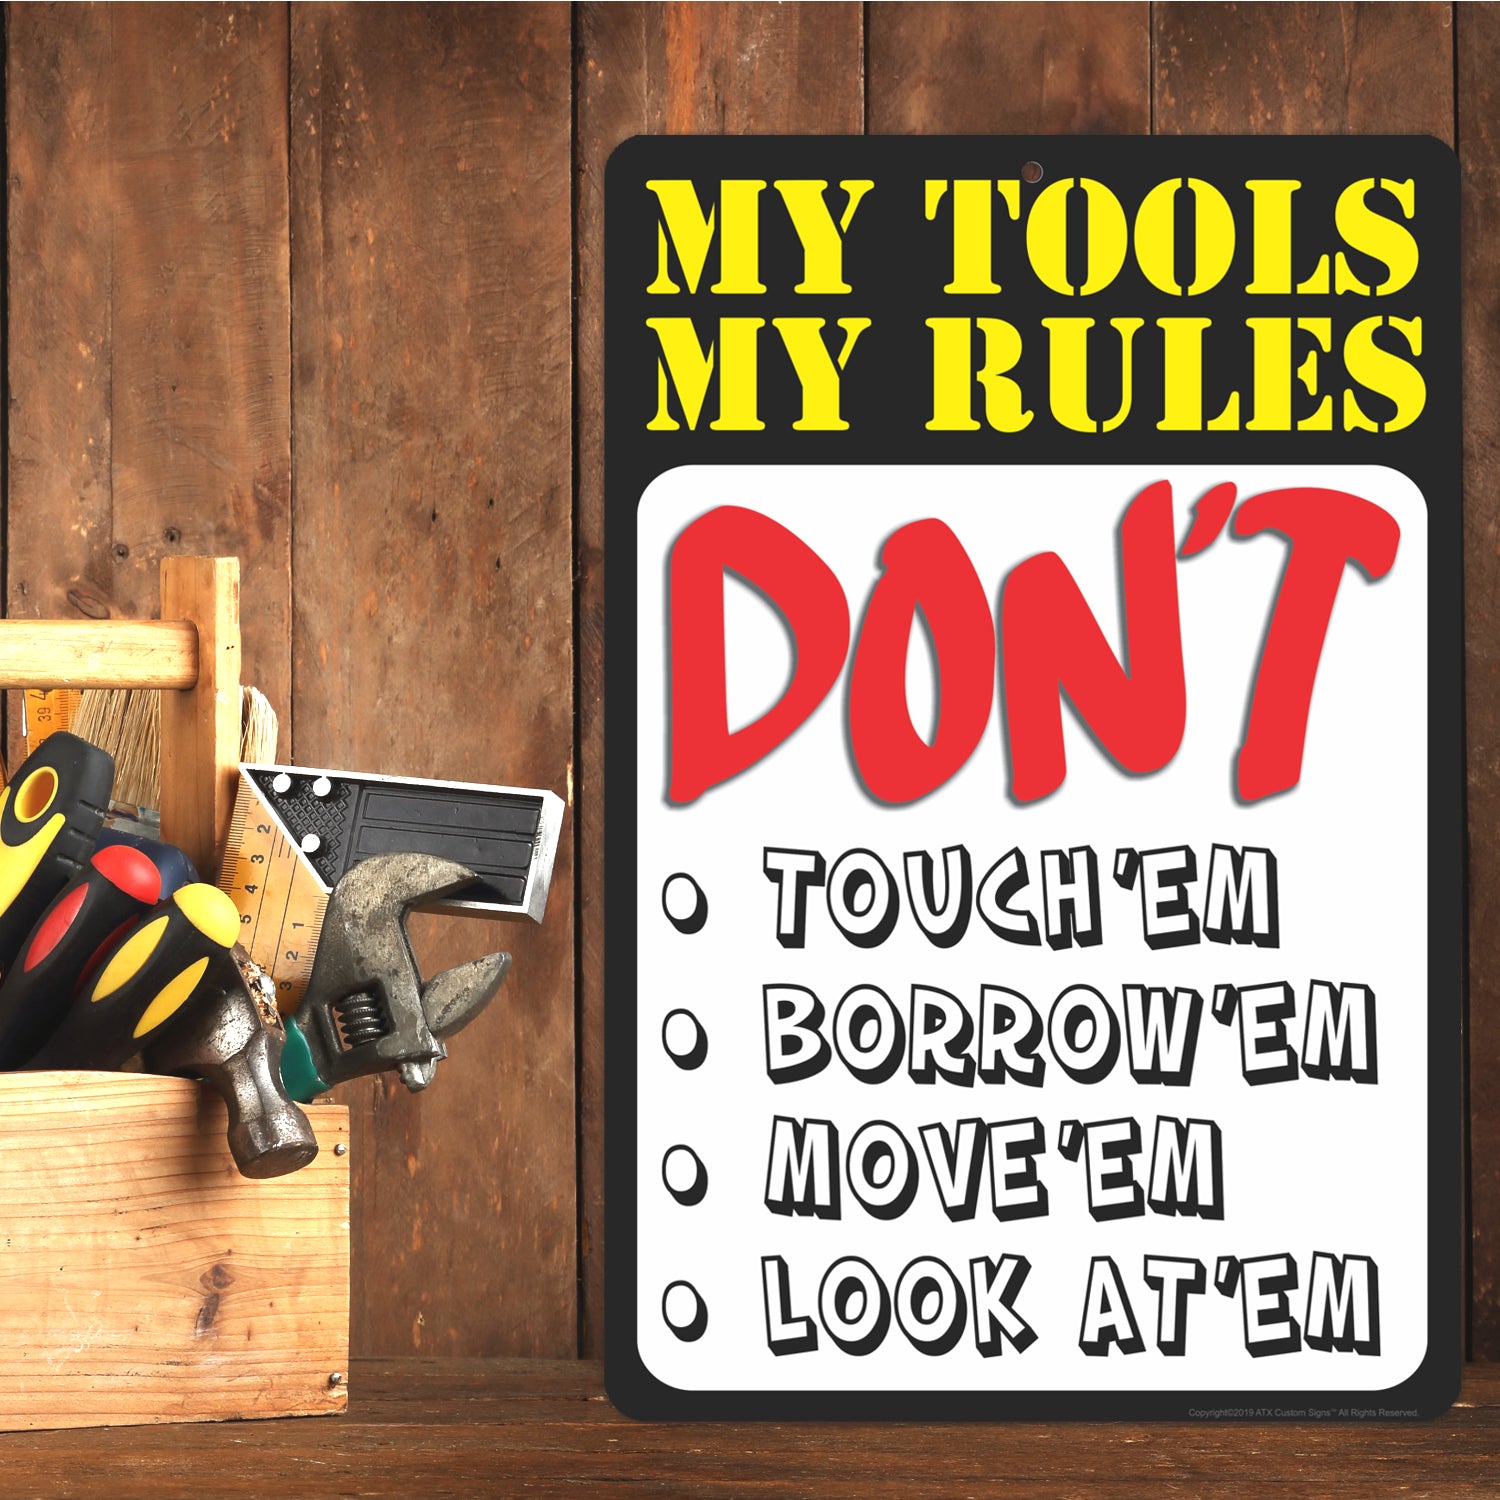 My Tools Rule Metal Wall Thermometer Sign